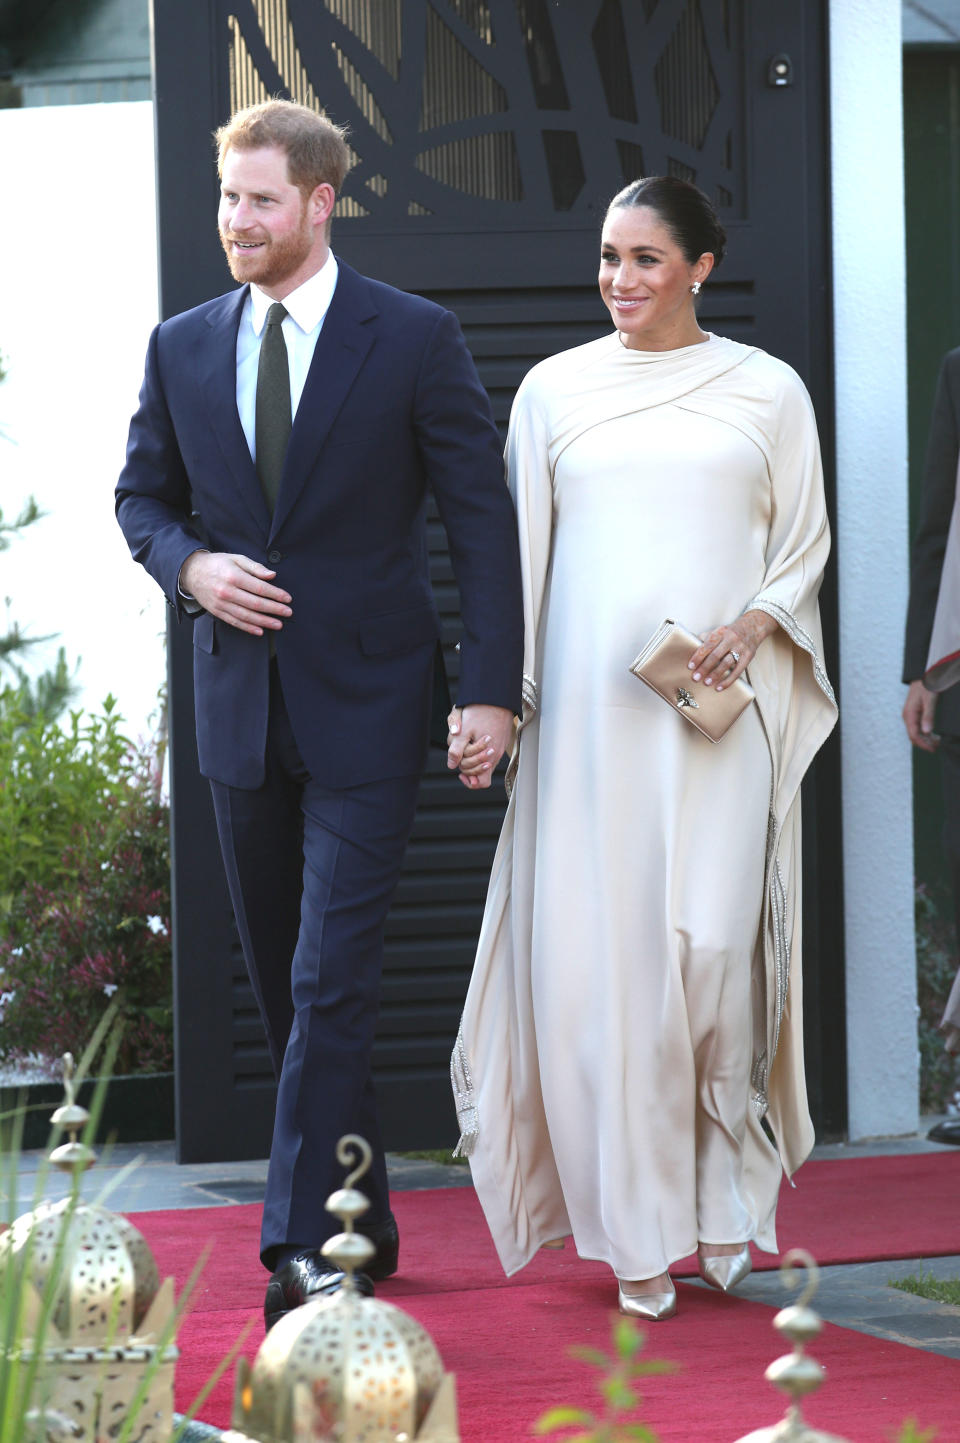 Prince Harry and Meghan Markle in Morocco on 24 February 2019